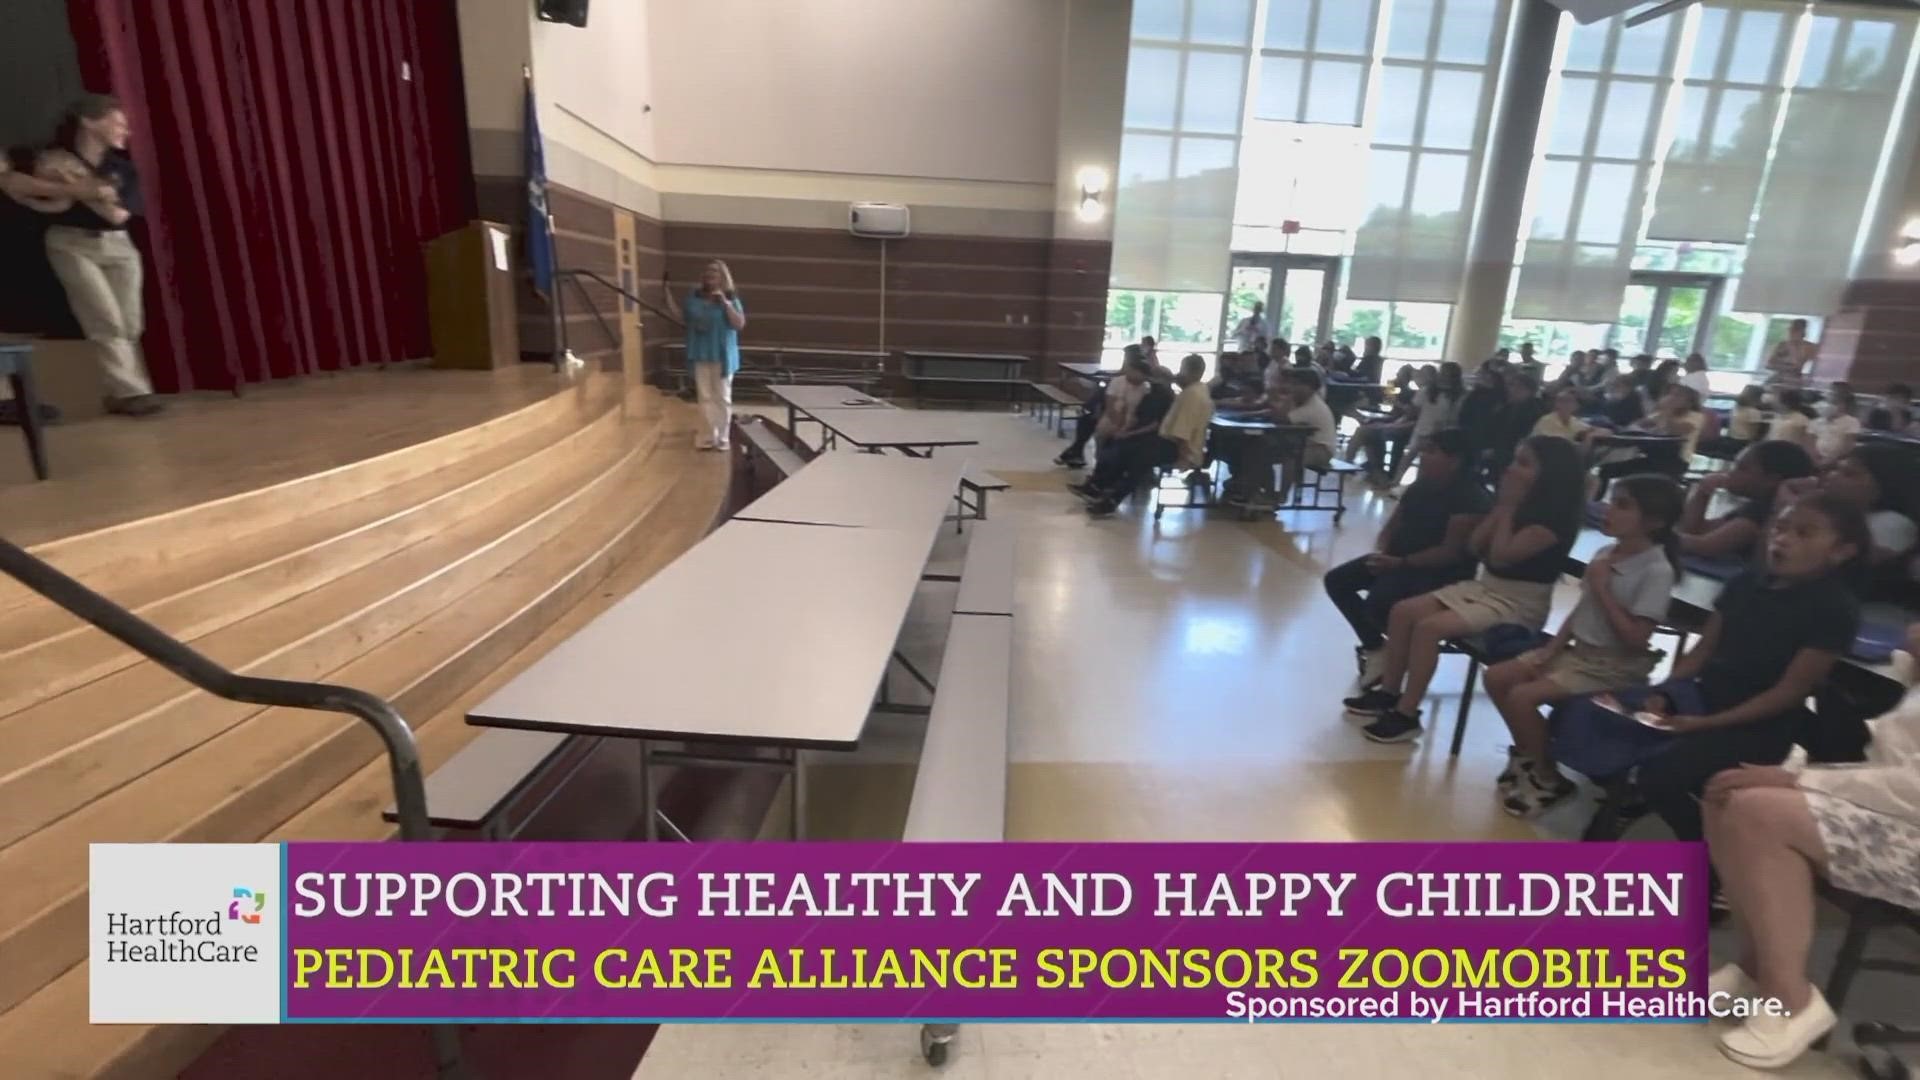 Hartford HealthCare's pediatric alliance sponsors zoo mobiles to support healthy and happy kids.